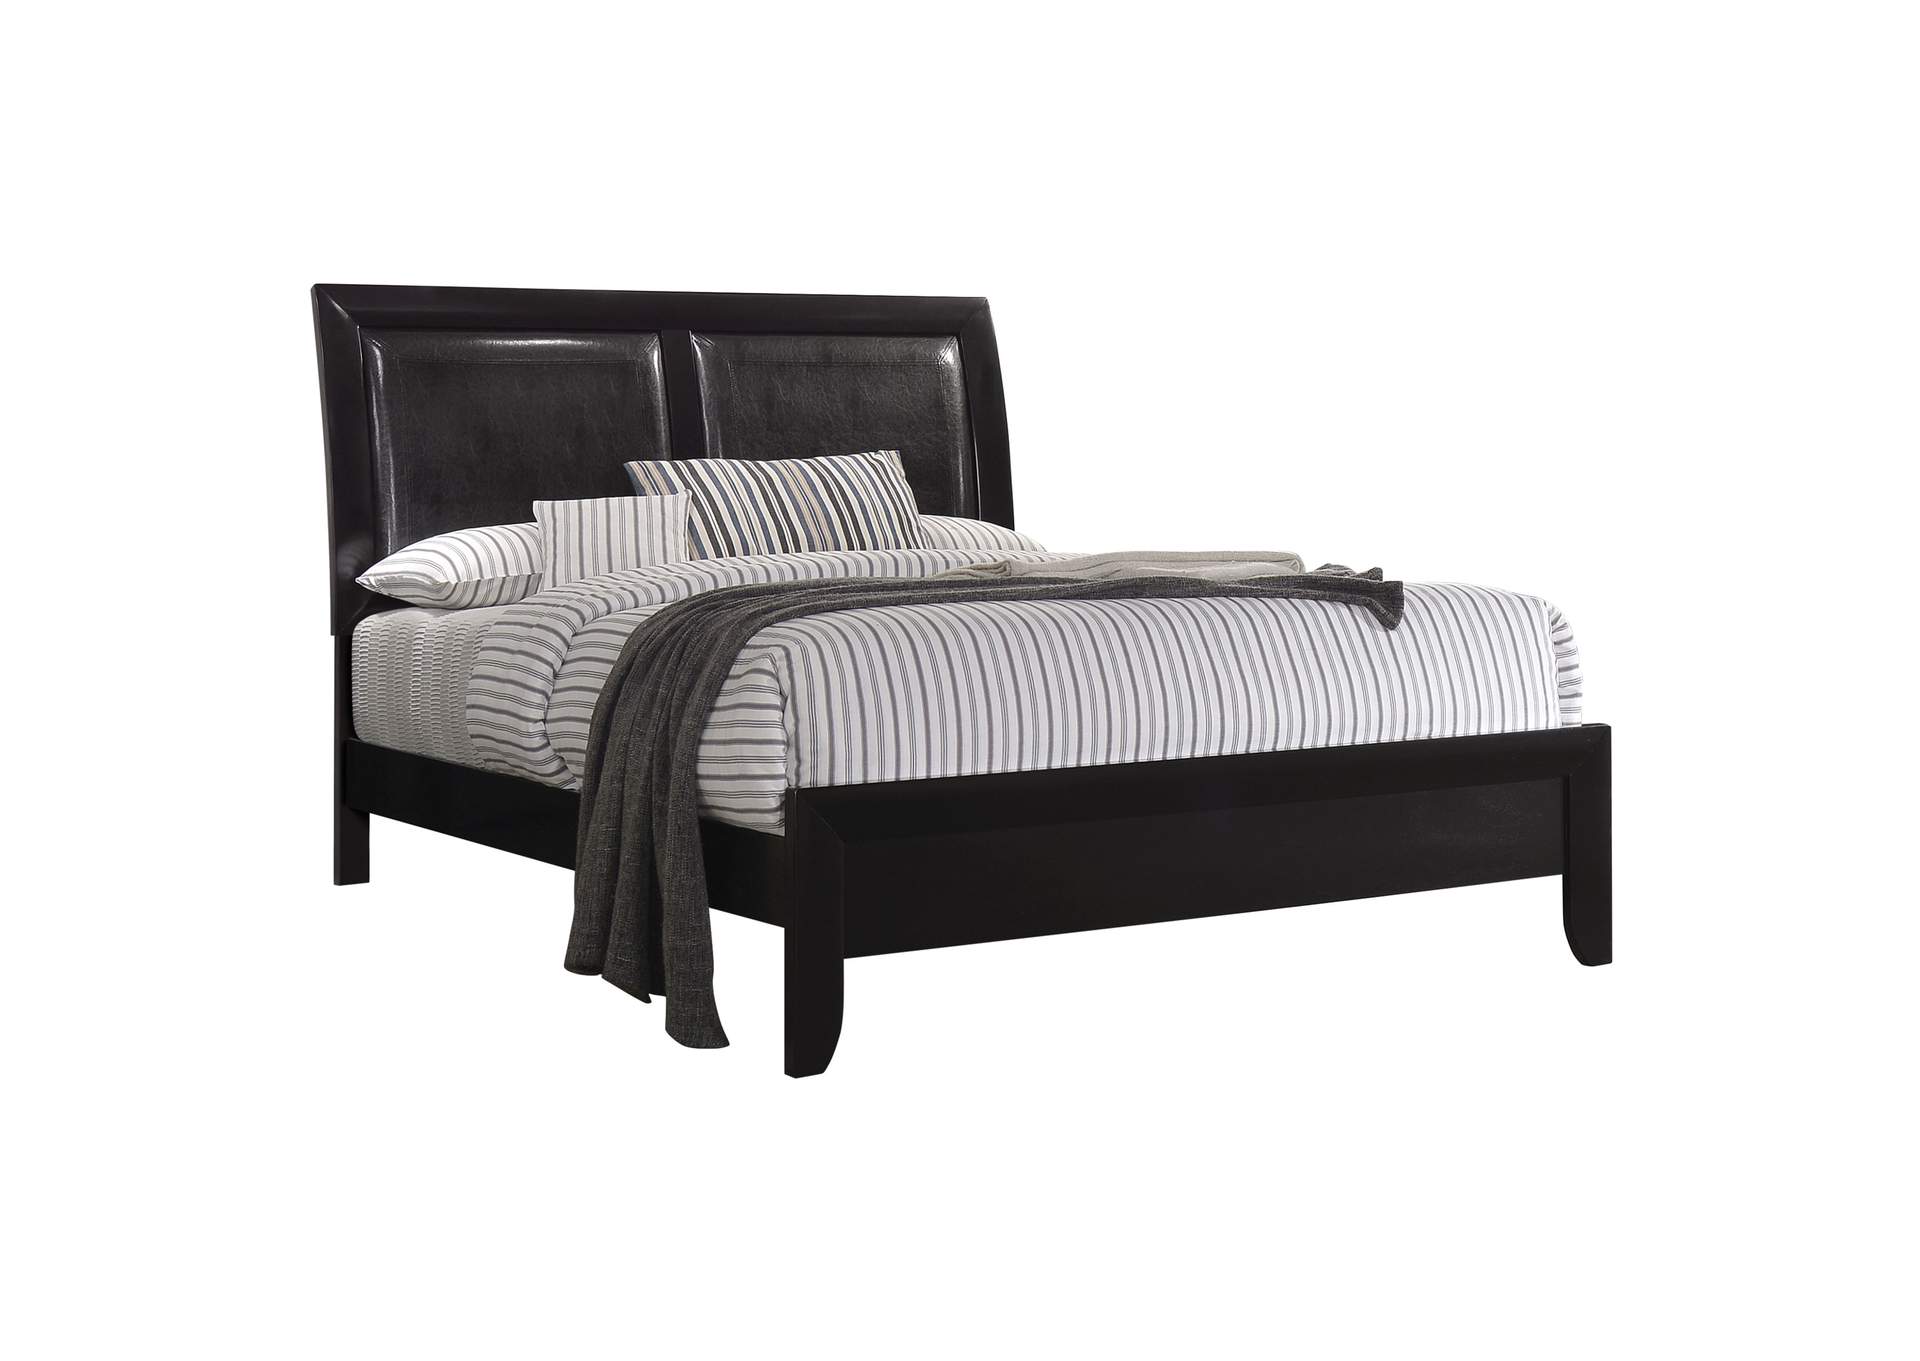 Briana Queen Upholstered Panel Bed Black,Coaster Furniture